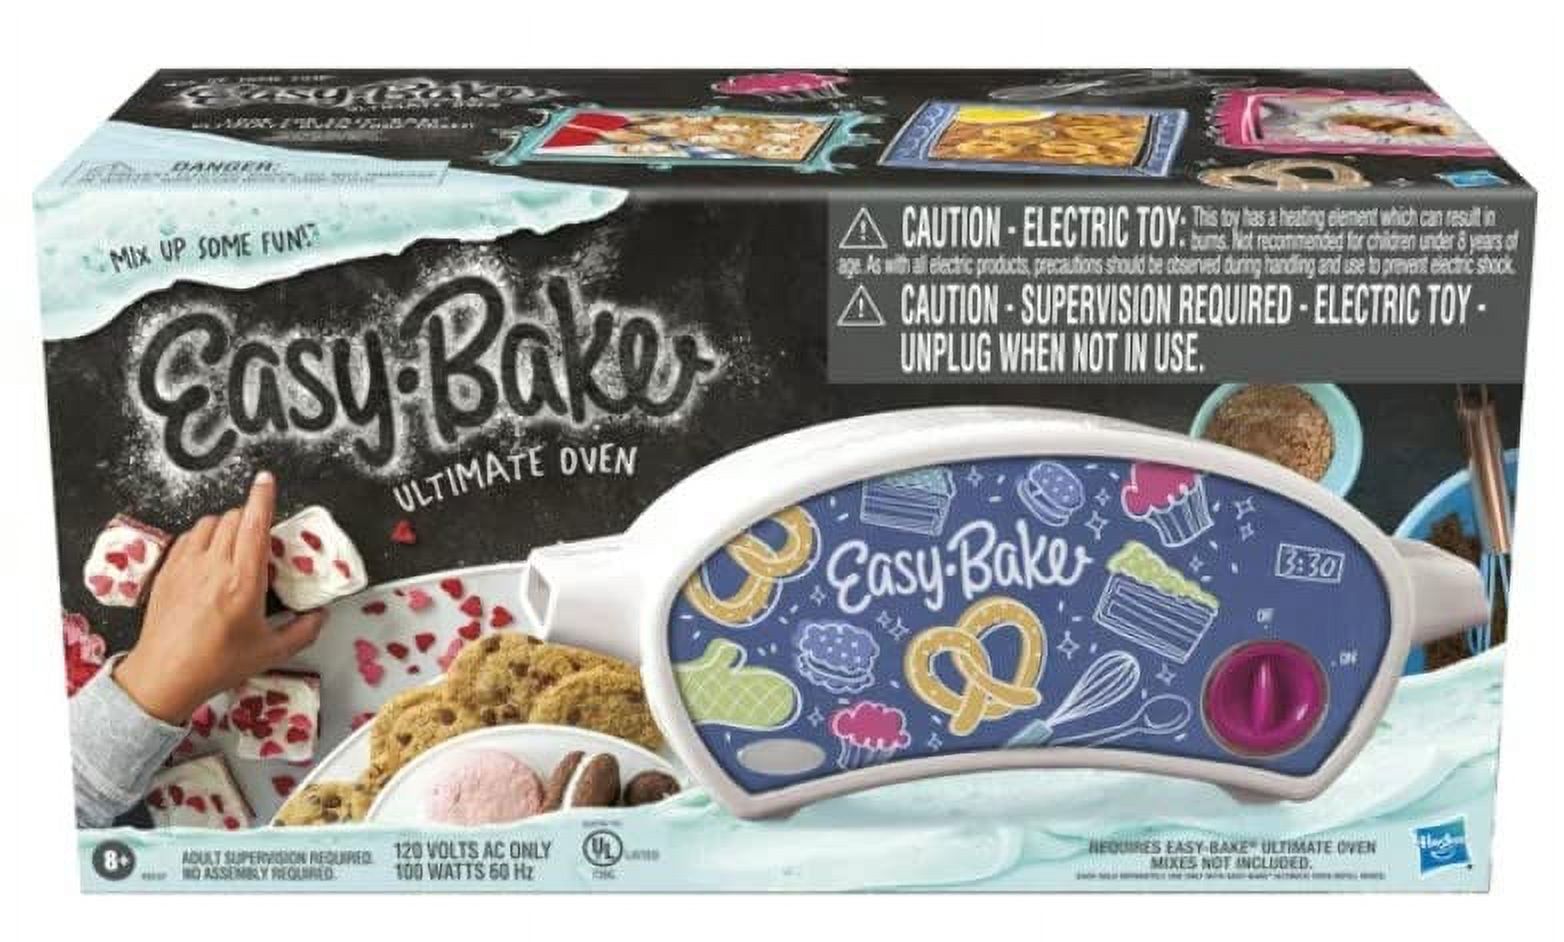 Easy Bake Ultimate Oven Baking Bundle with Easy Bake Ultimate Oven, Chocolate Chip & Pink Sugar Cookies, Pretzel, Mini Whoopie, Cheese Pizza Mixes and More for Kids 8yrs and Up - image 5 of 8